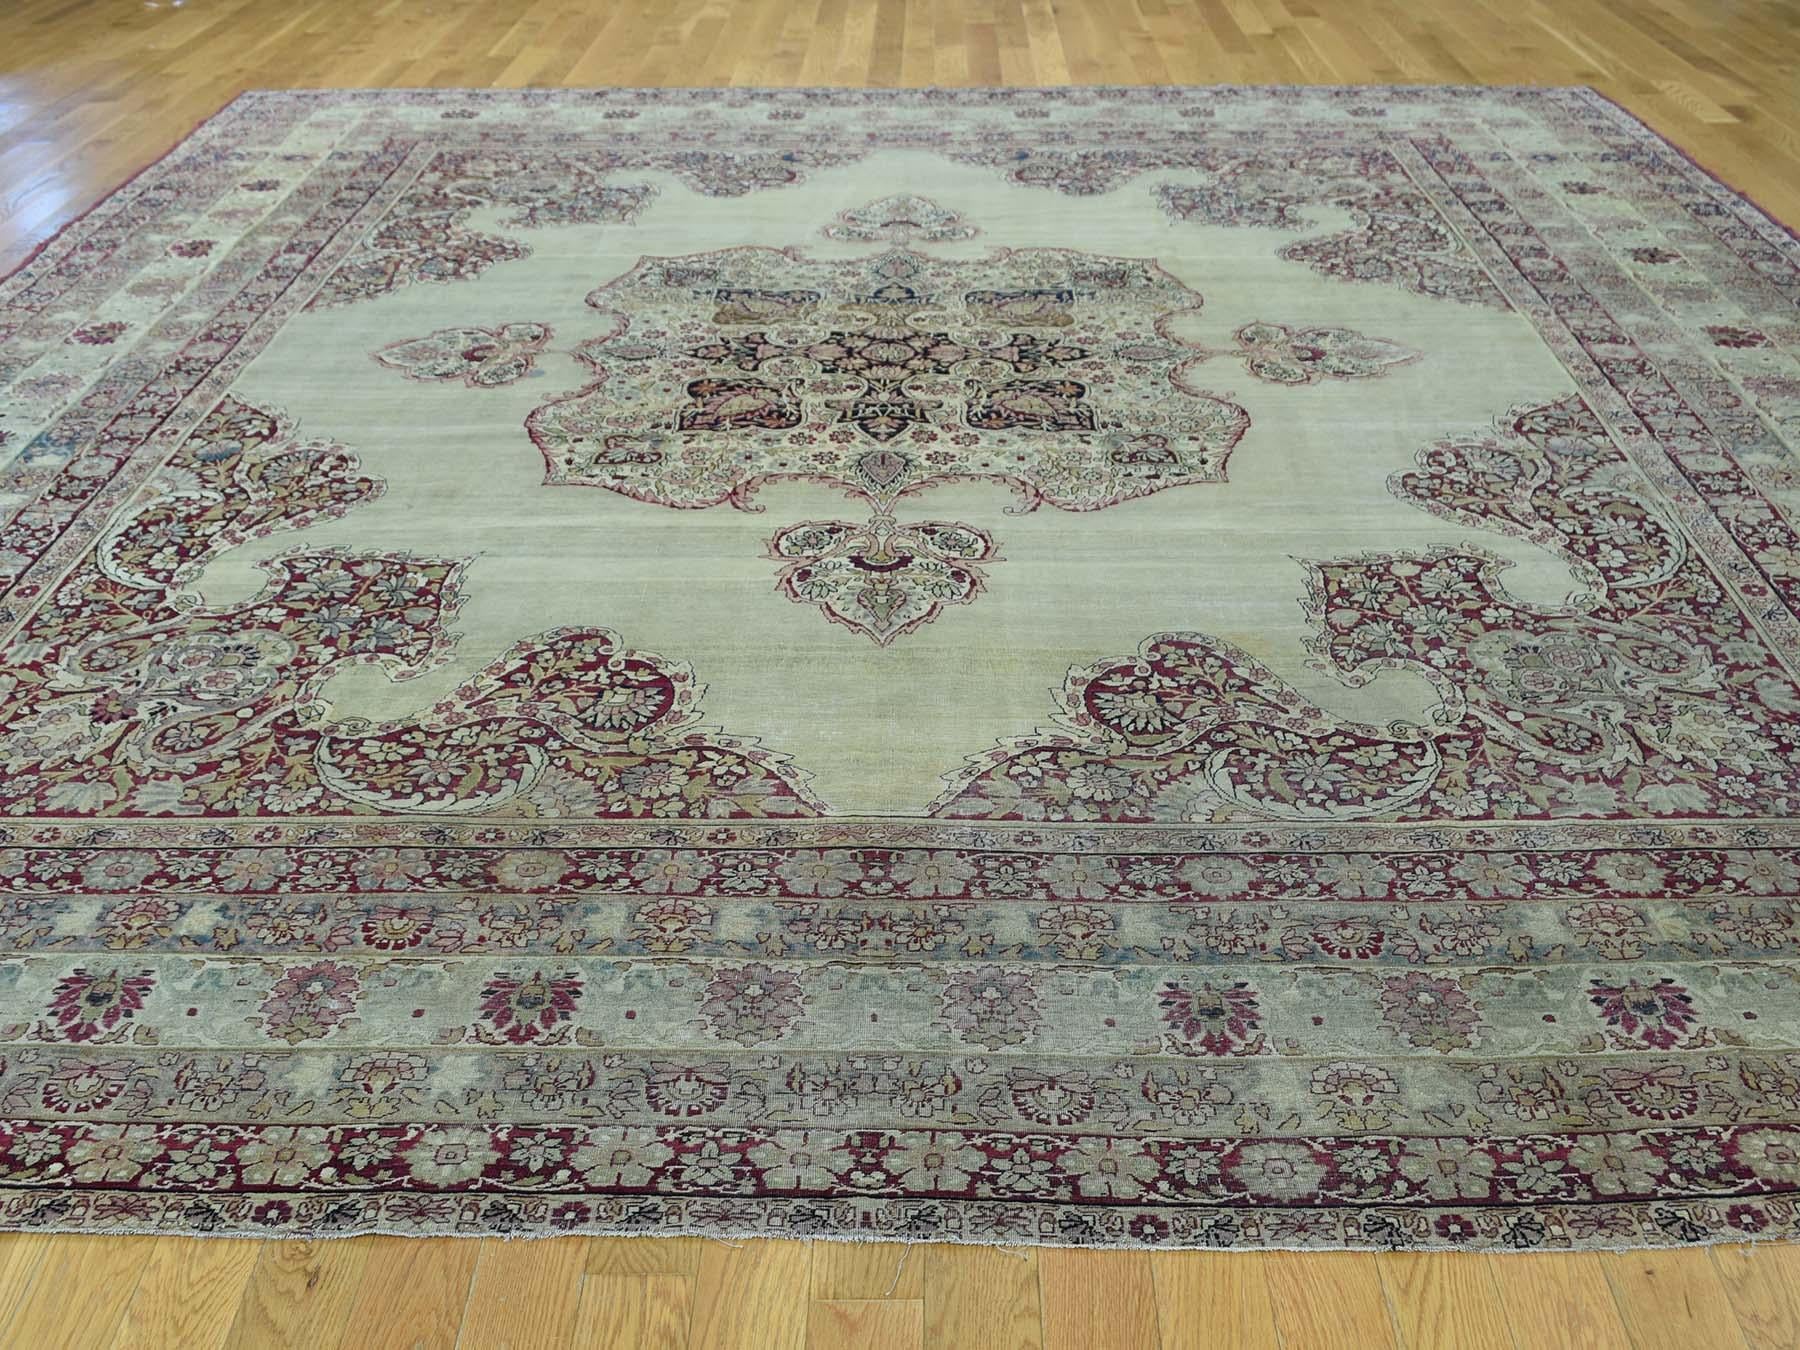 This is a genuine hand knotted oriental rug. It is not hand tufted or machine made rug. Our entire inventory is made of either hand knotted or handwoven rugs.

Bring life to your home with this lovely antique carpet. This handcrafted Lavar Kerman